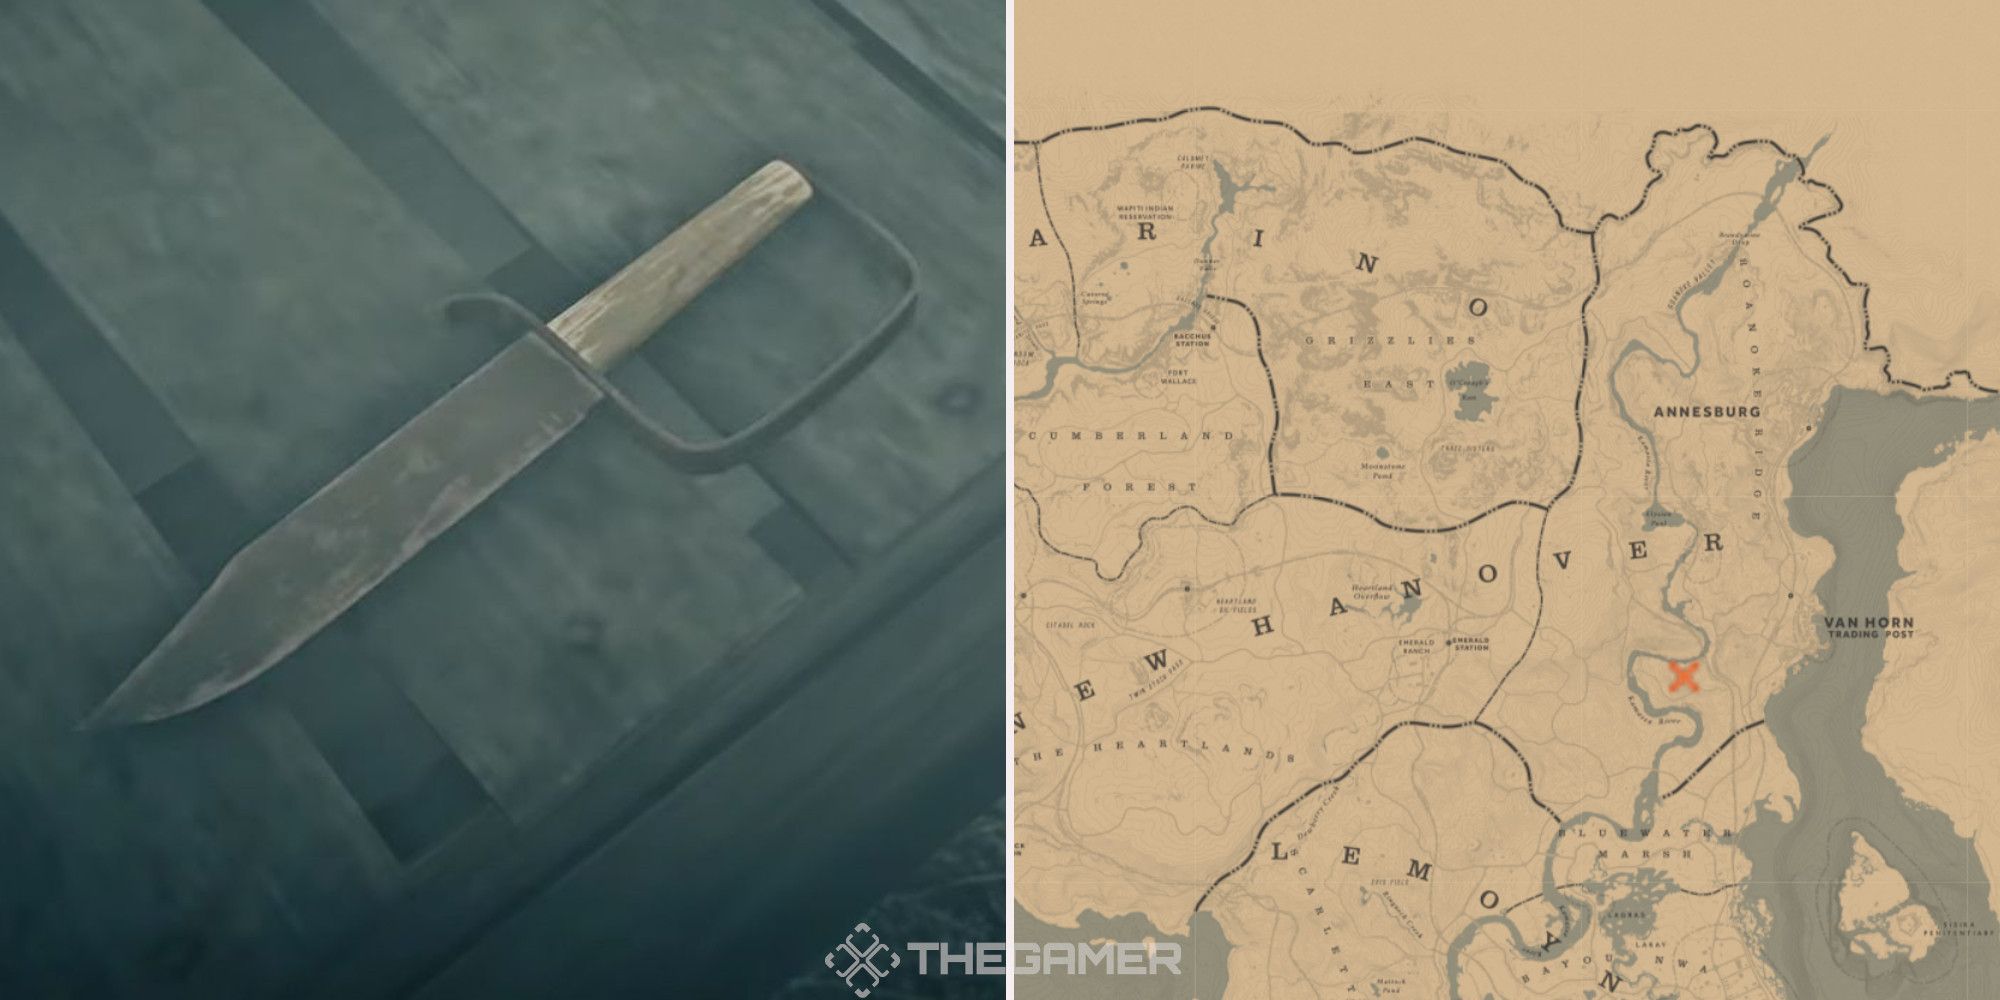 The civil war knife in Red Dead Redemption 2, next to an image of where it can be found marked on the map.